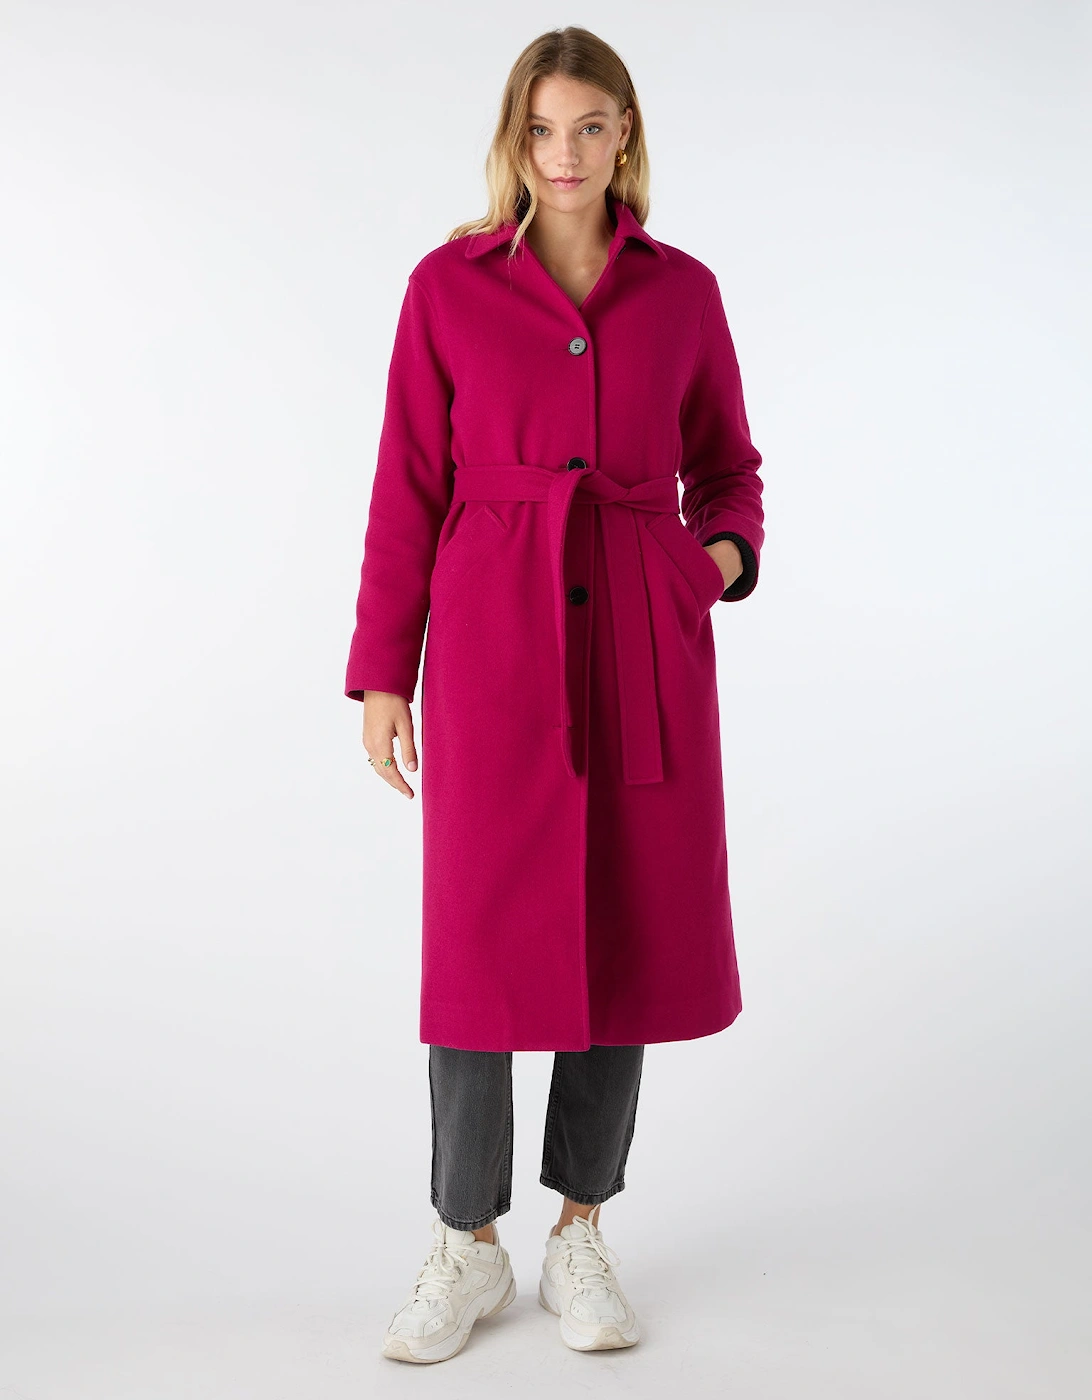 Vienna Single Breasted Belted Coat in Magenta